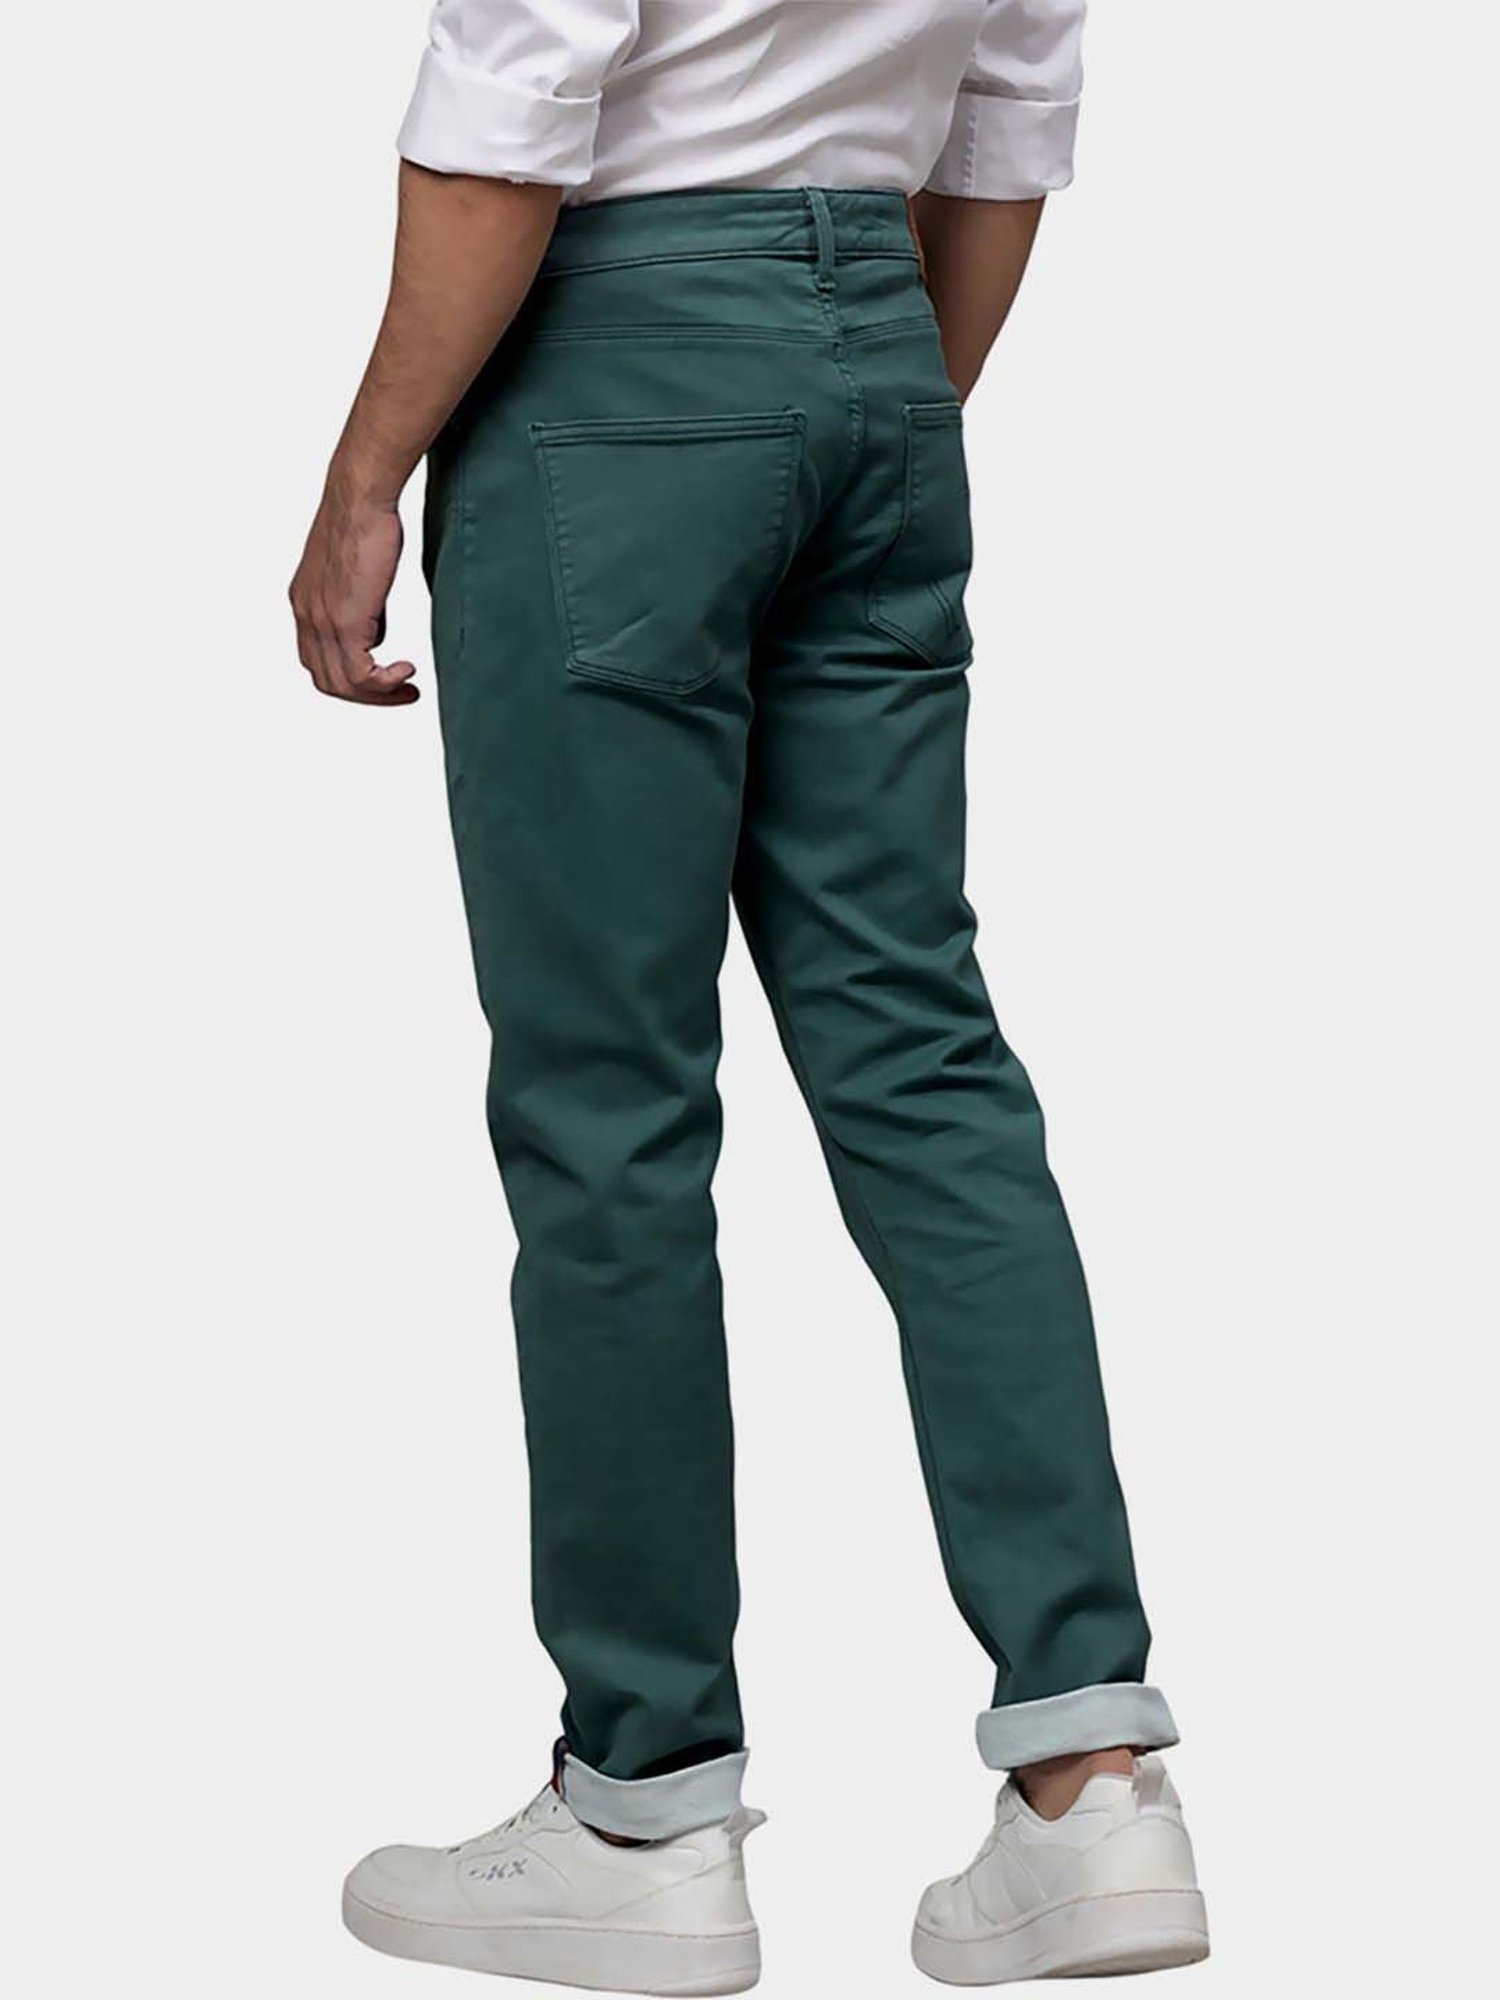 Buy Men's Being Human Solid Colour Pants Online | Centrepoint Bahrain